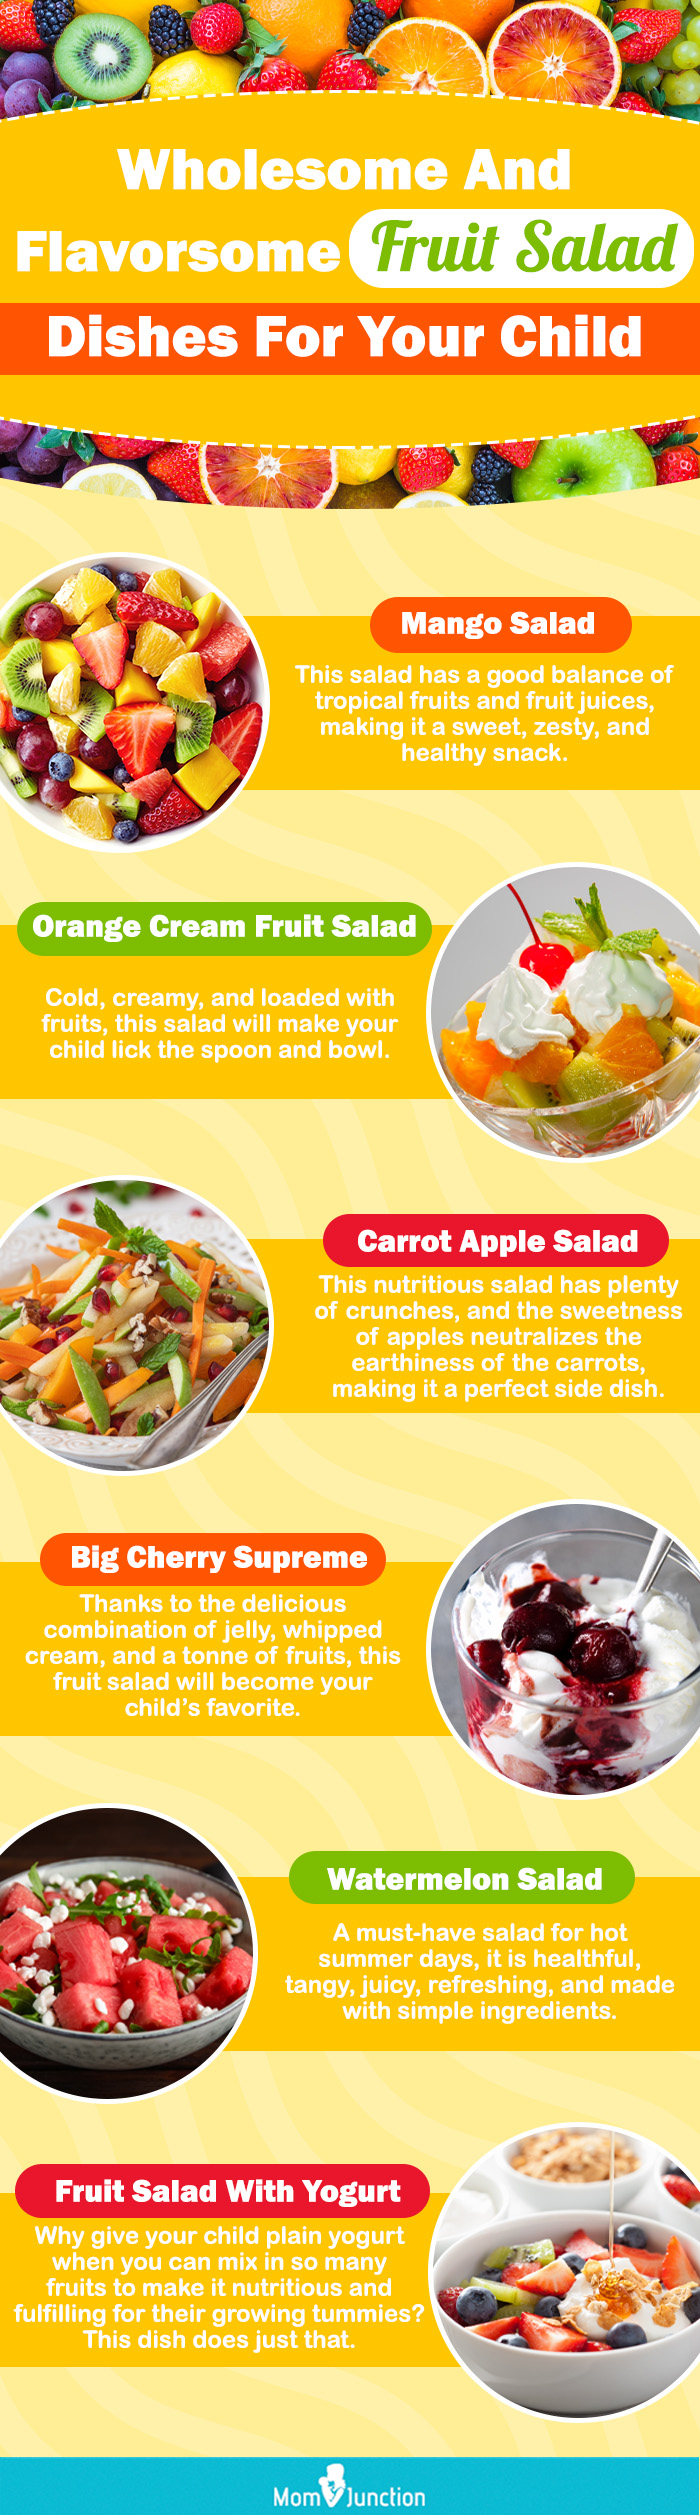 wholesome and flavorsome fruit salad dishes for your child (infographic)